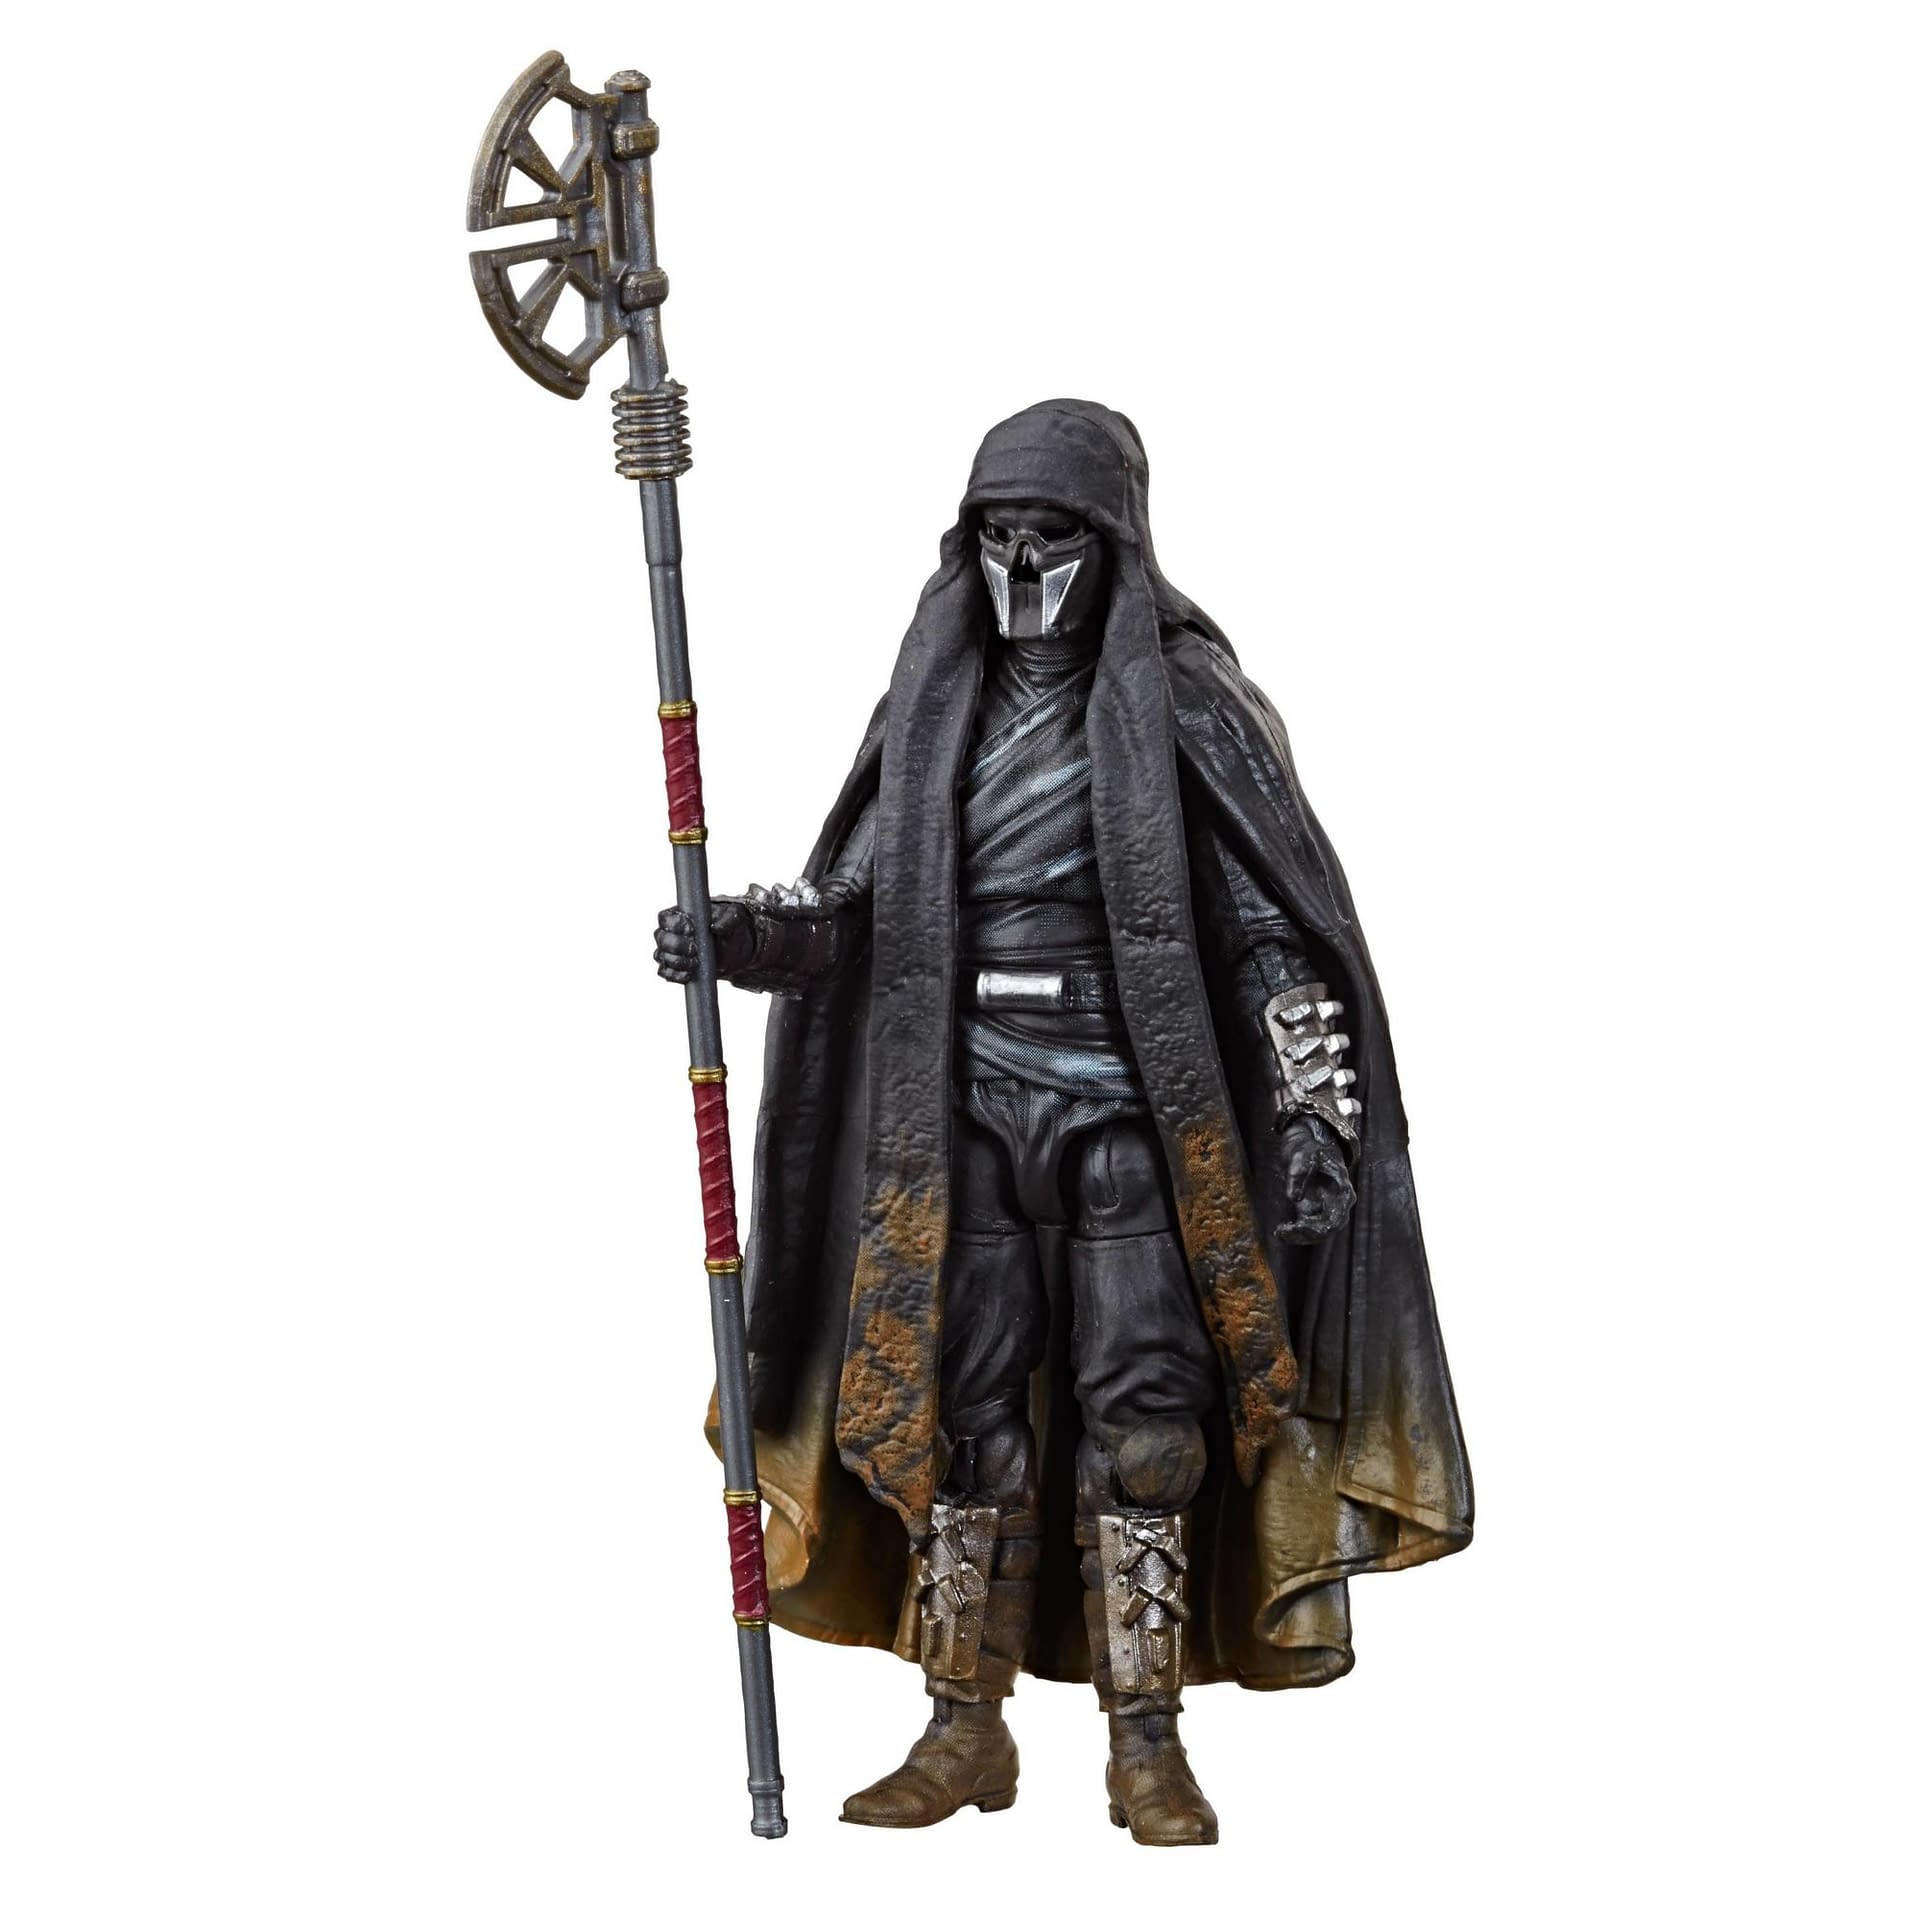 Star Wars: The Vintage Collection is Getting New Figures